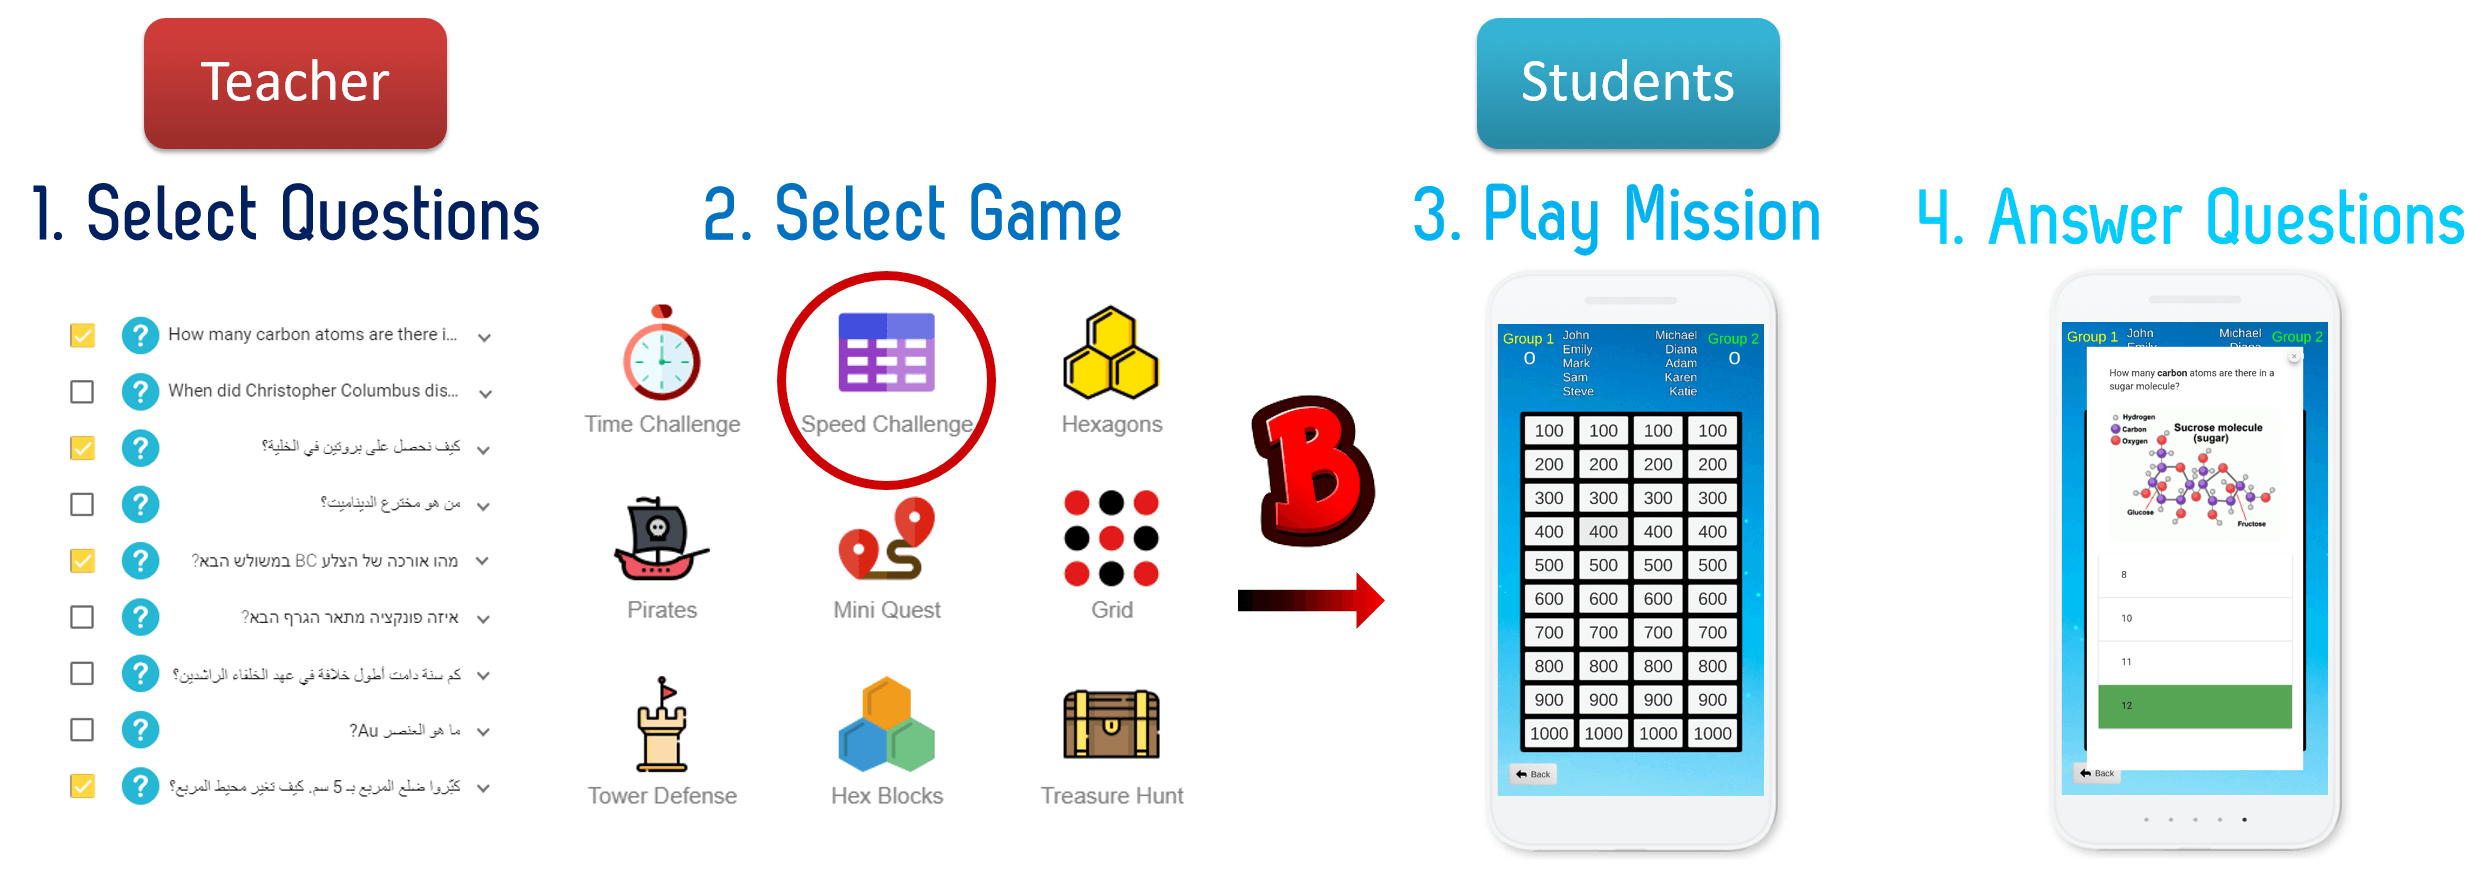 Teacher selects questions and game template, Students play the game while answering questions.